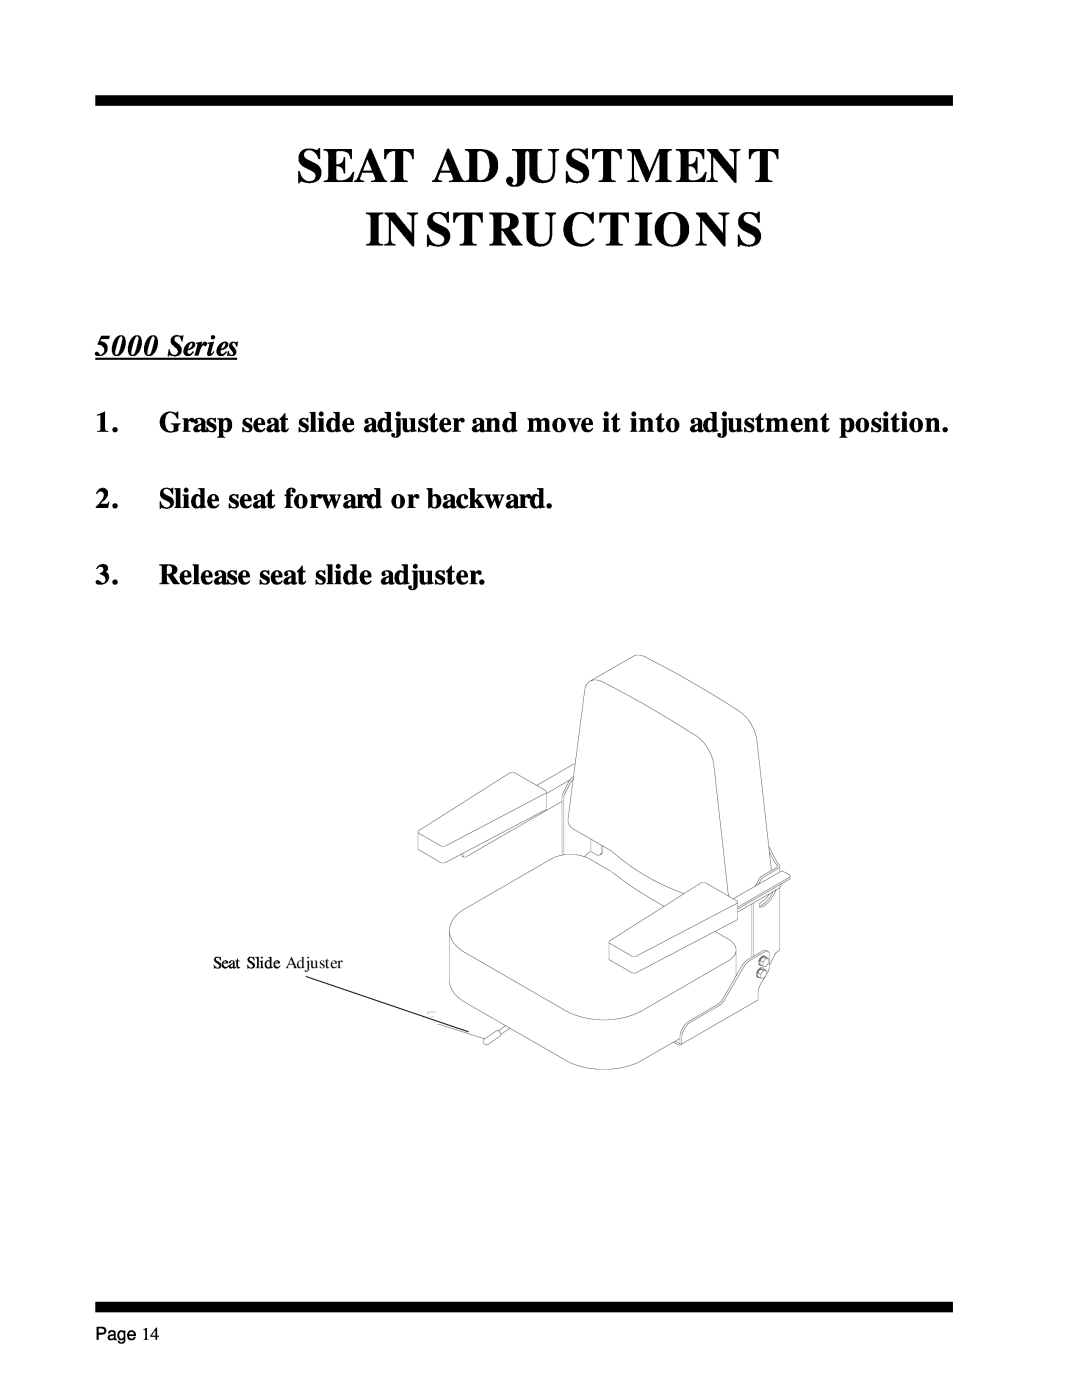 Dixon ZTR 5017Twin Seat Adjustment Instructions, Series, Grasp seat slide adjuster and move it into adjustment position 